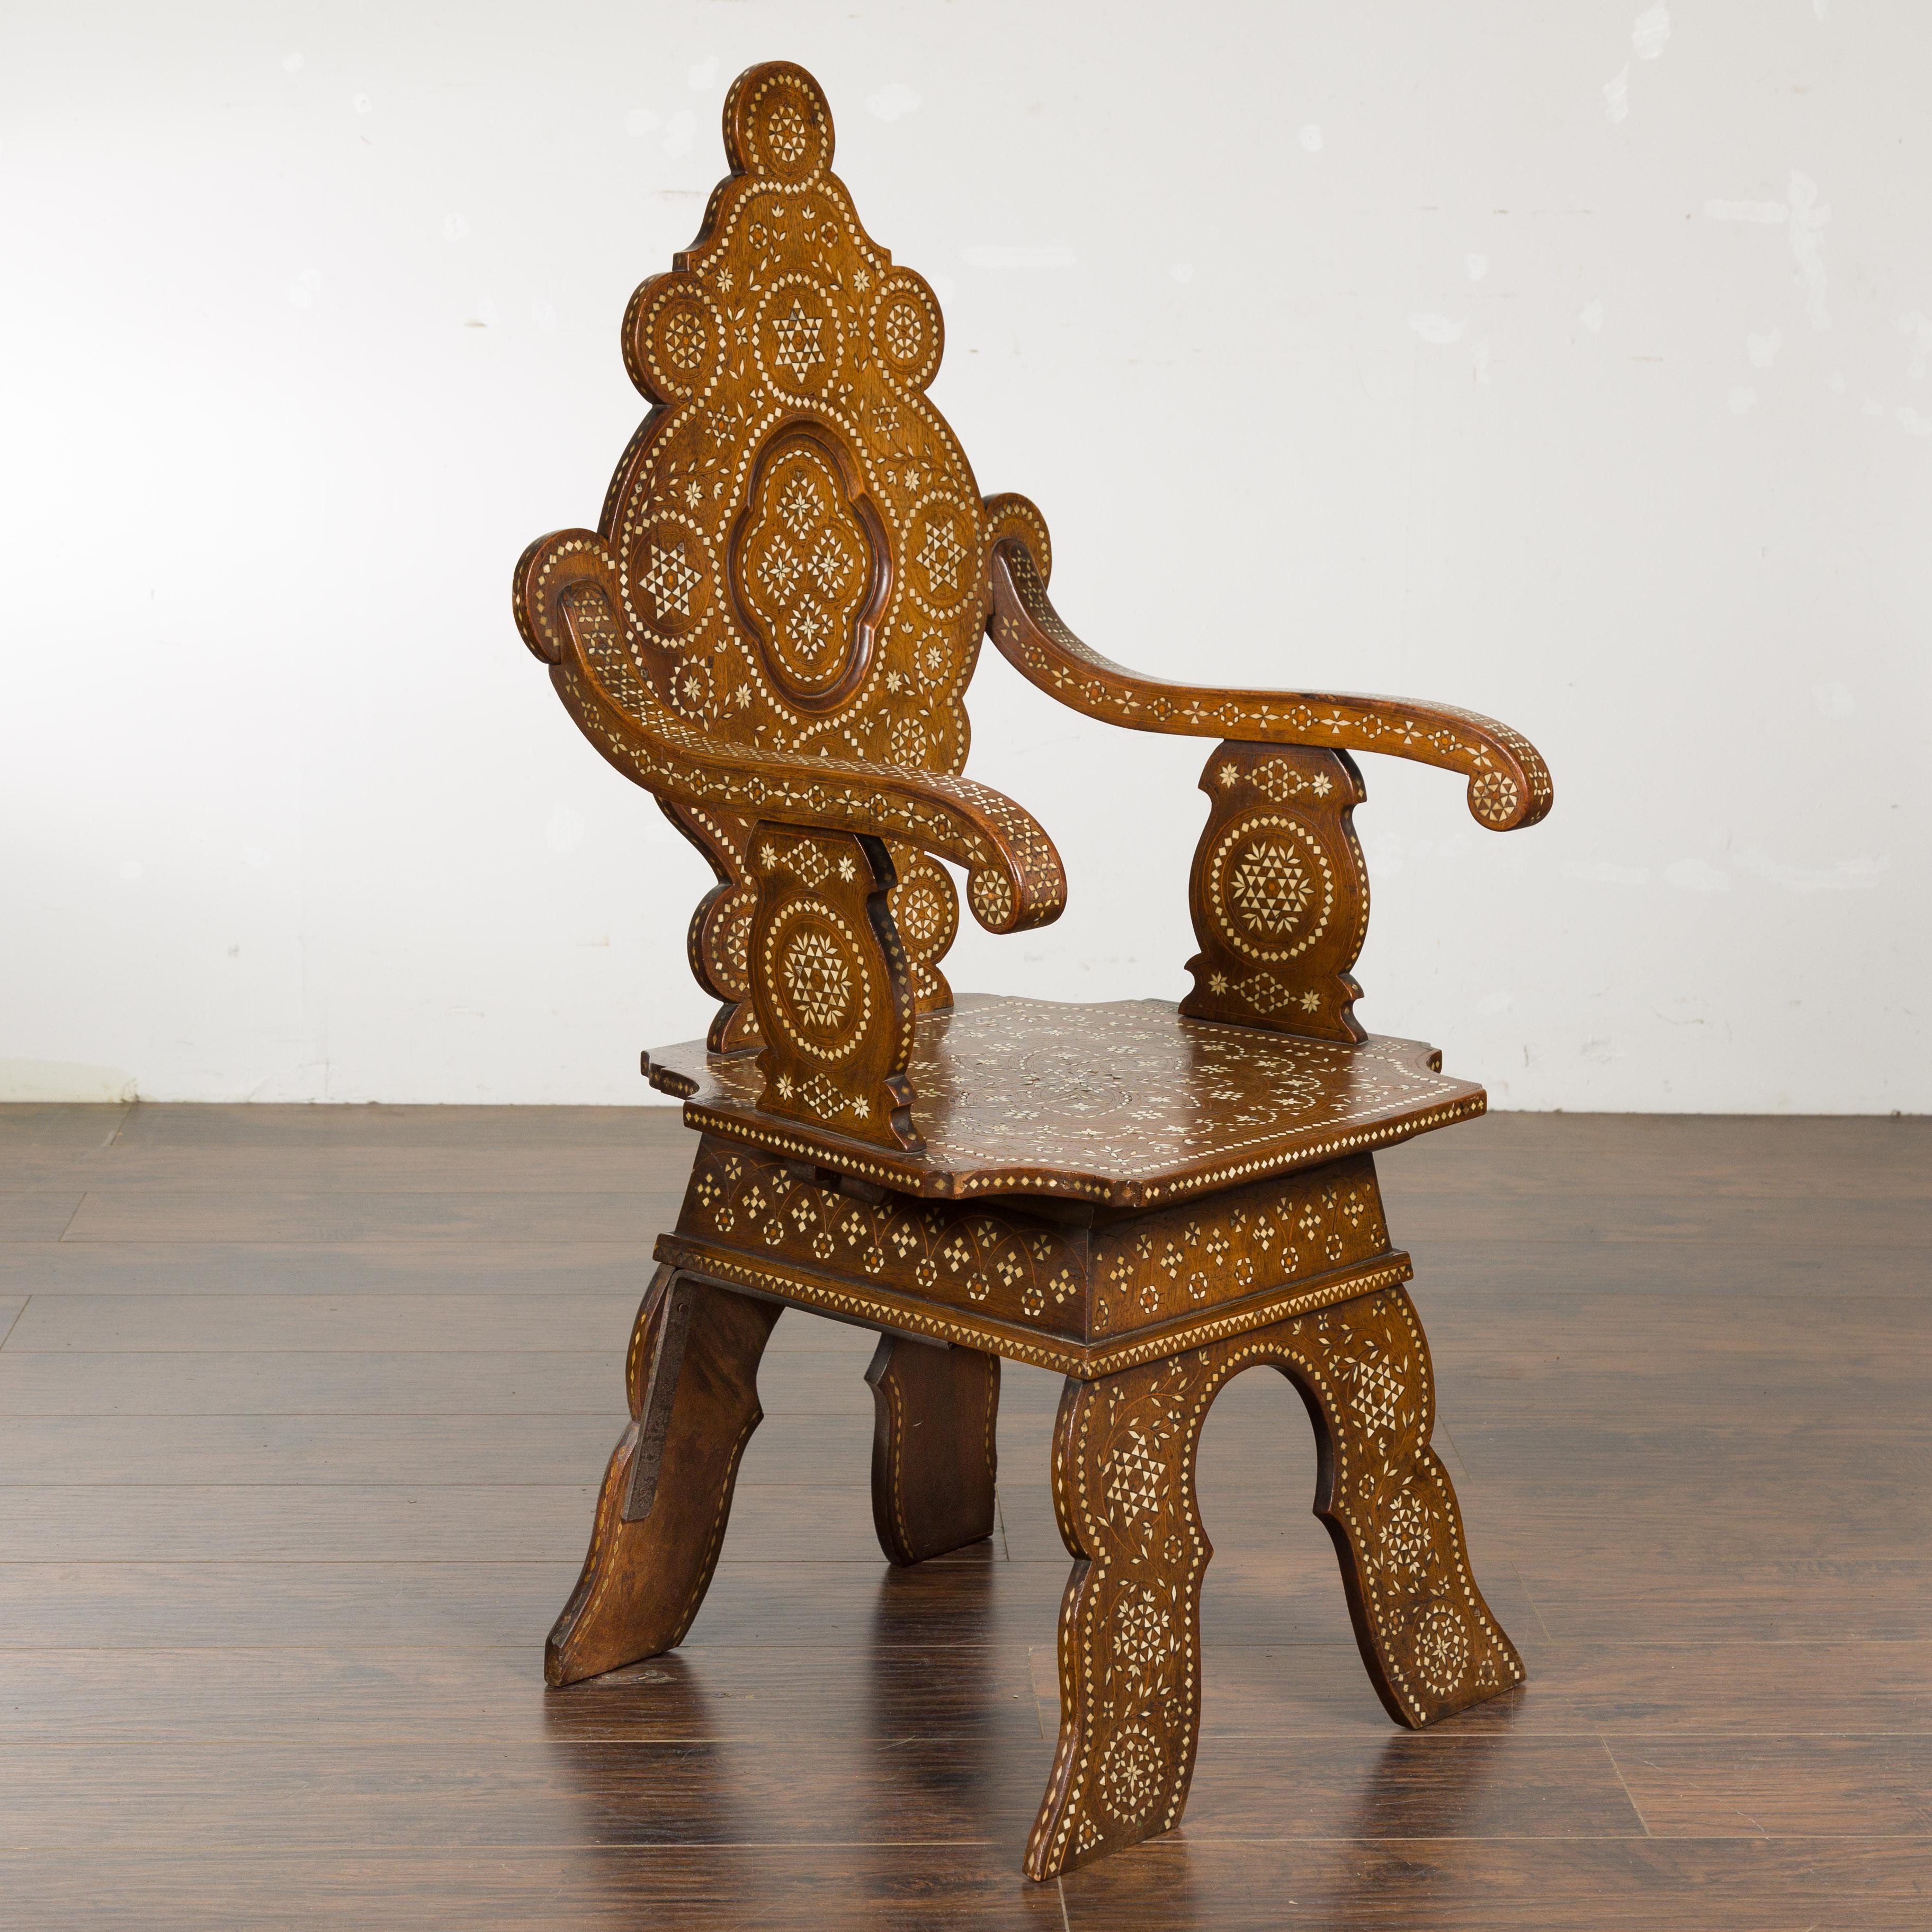 A Moorish style Moroccan wooden armchair from circa 1900 with bone inlaid décor, carved back, scrolling arms and carved base. This exquisite Moorish-style Moroccan wooden armchair, dating from circa 1900, is a stunning testament to masterful